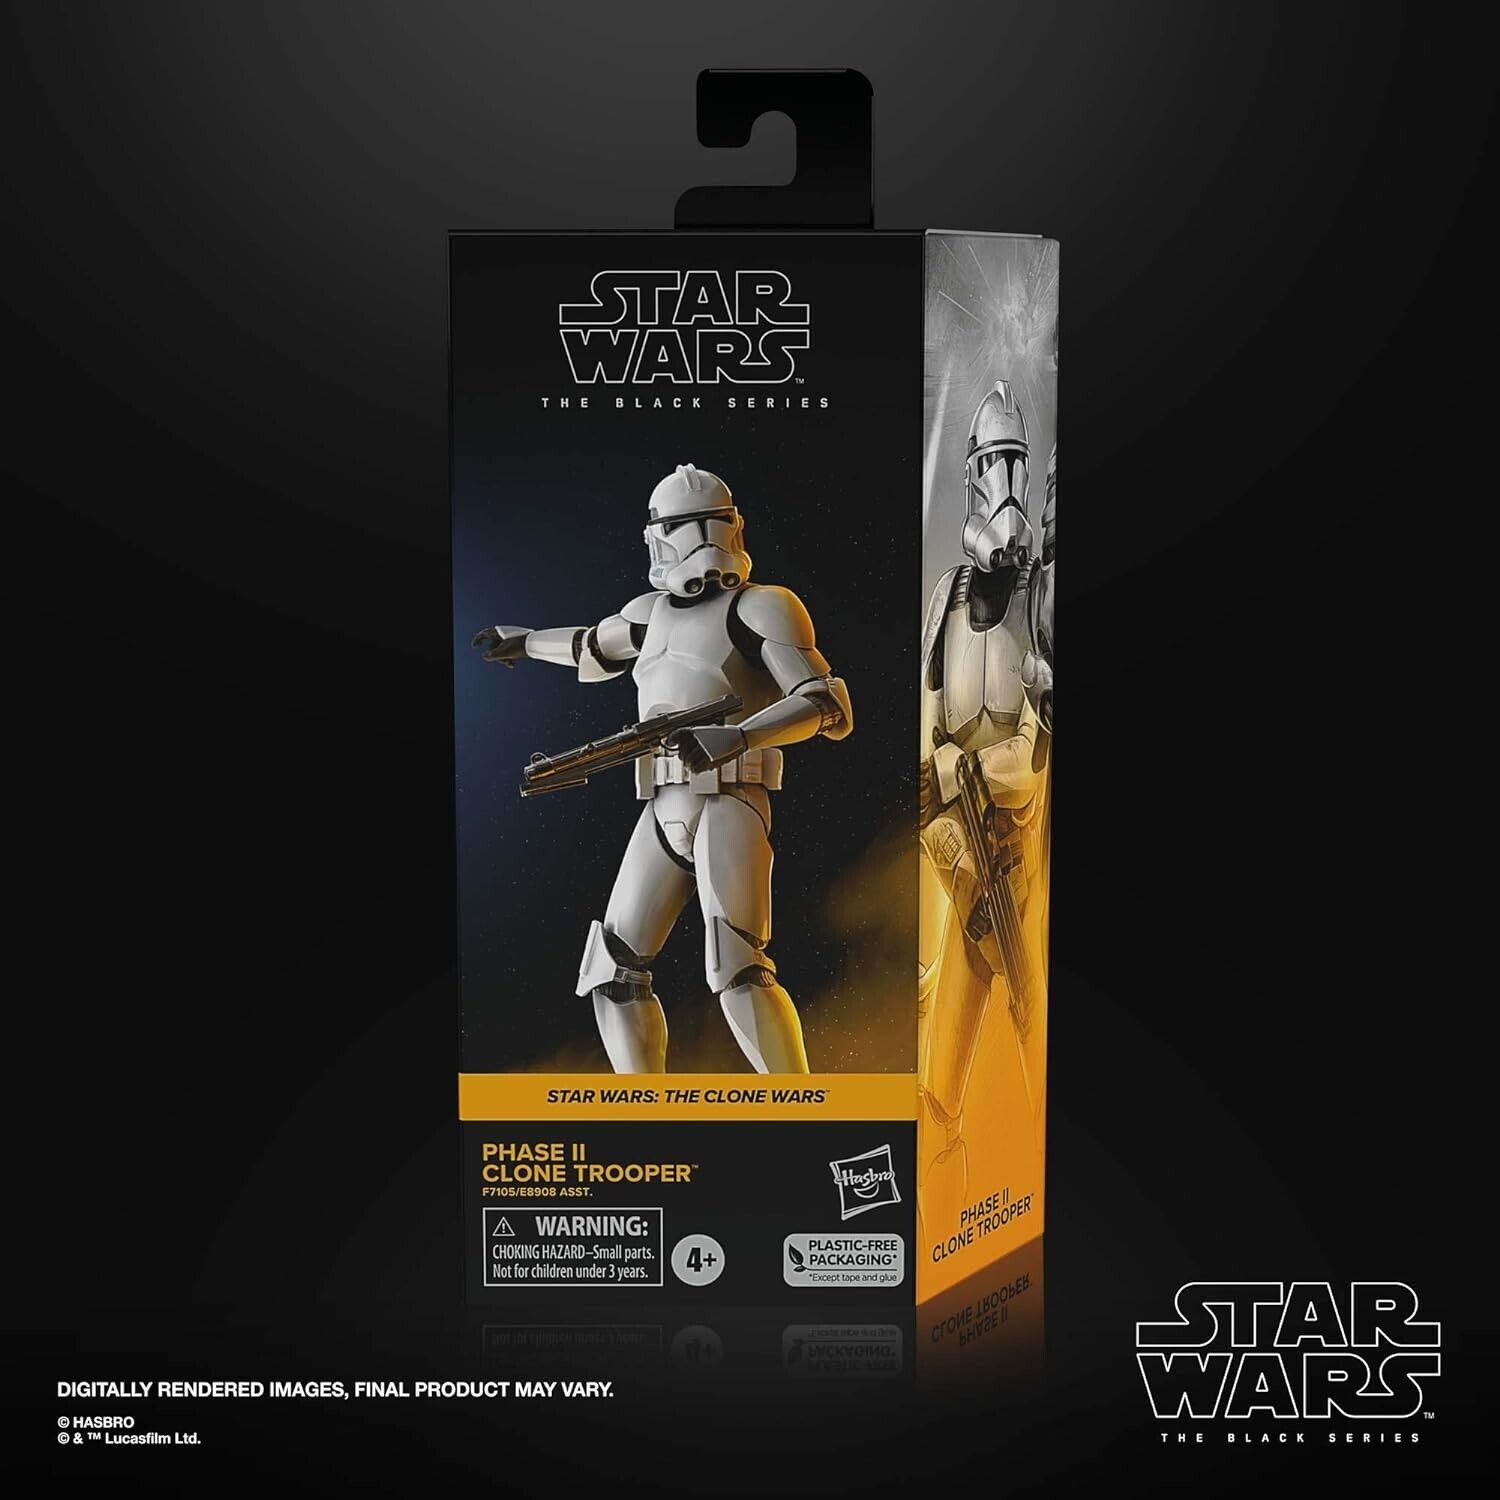 STAR WARS The Black Series Phase II Clone Trooper, The Clone Wars 6-Inch Action